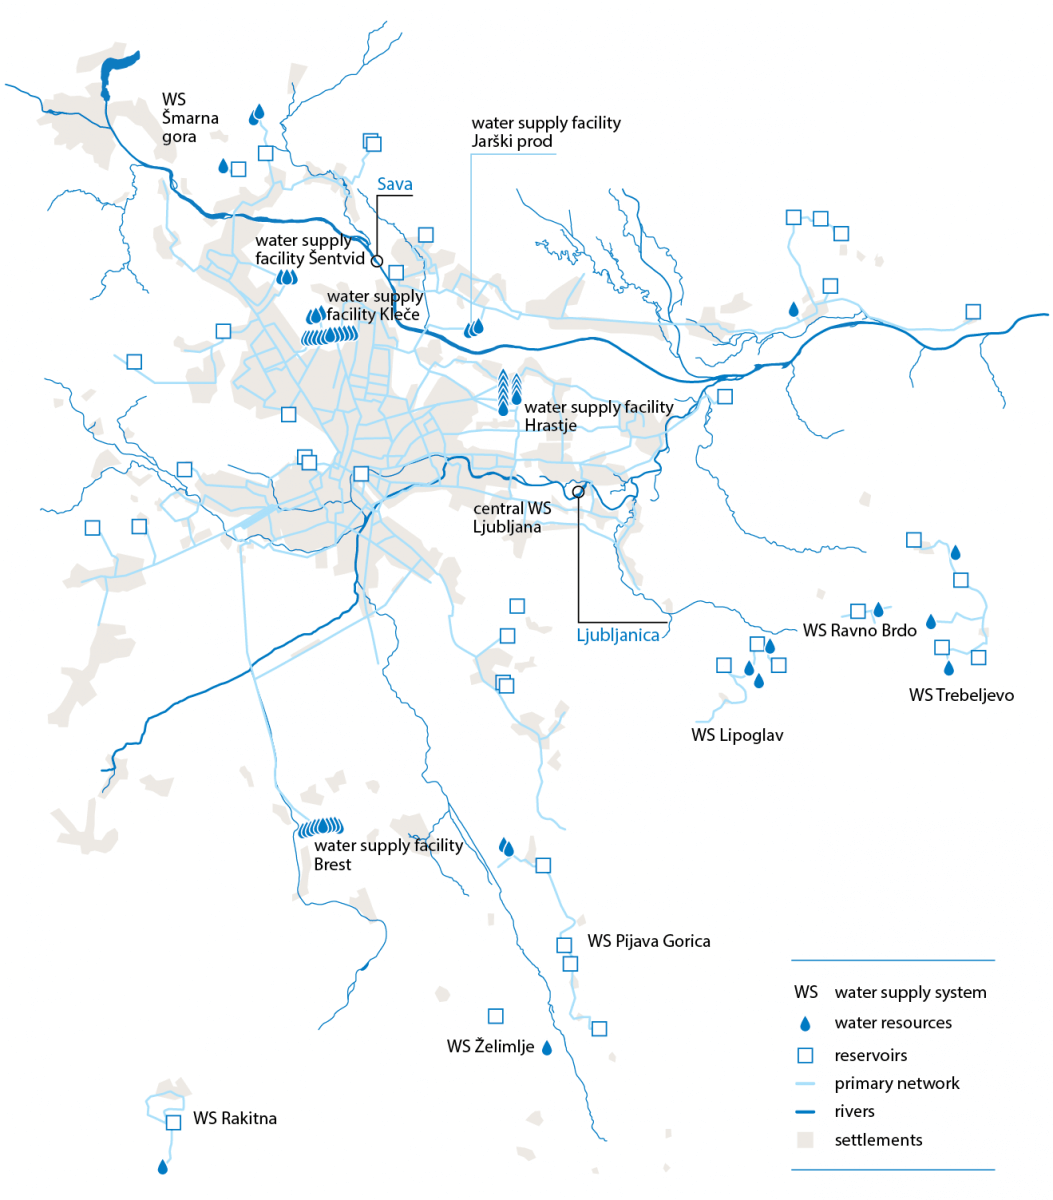 Drinking water supply systems in Ljubljana and its surroundings operated by JP VOKA SNAGA.